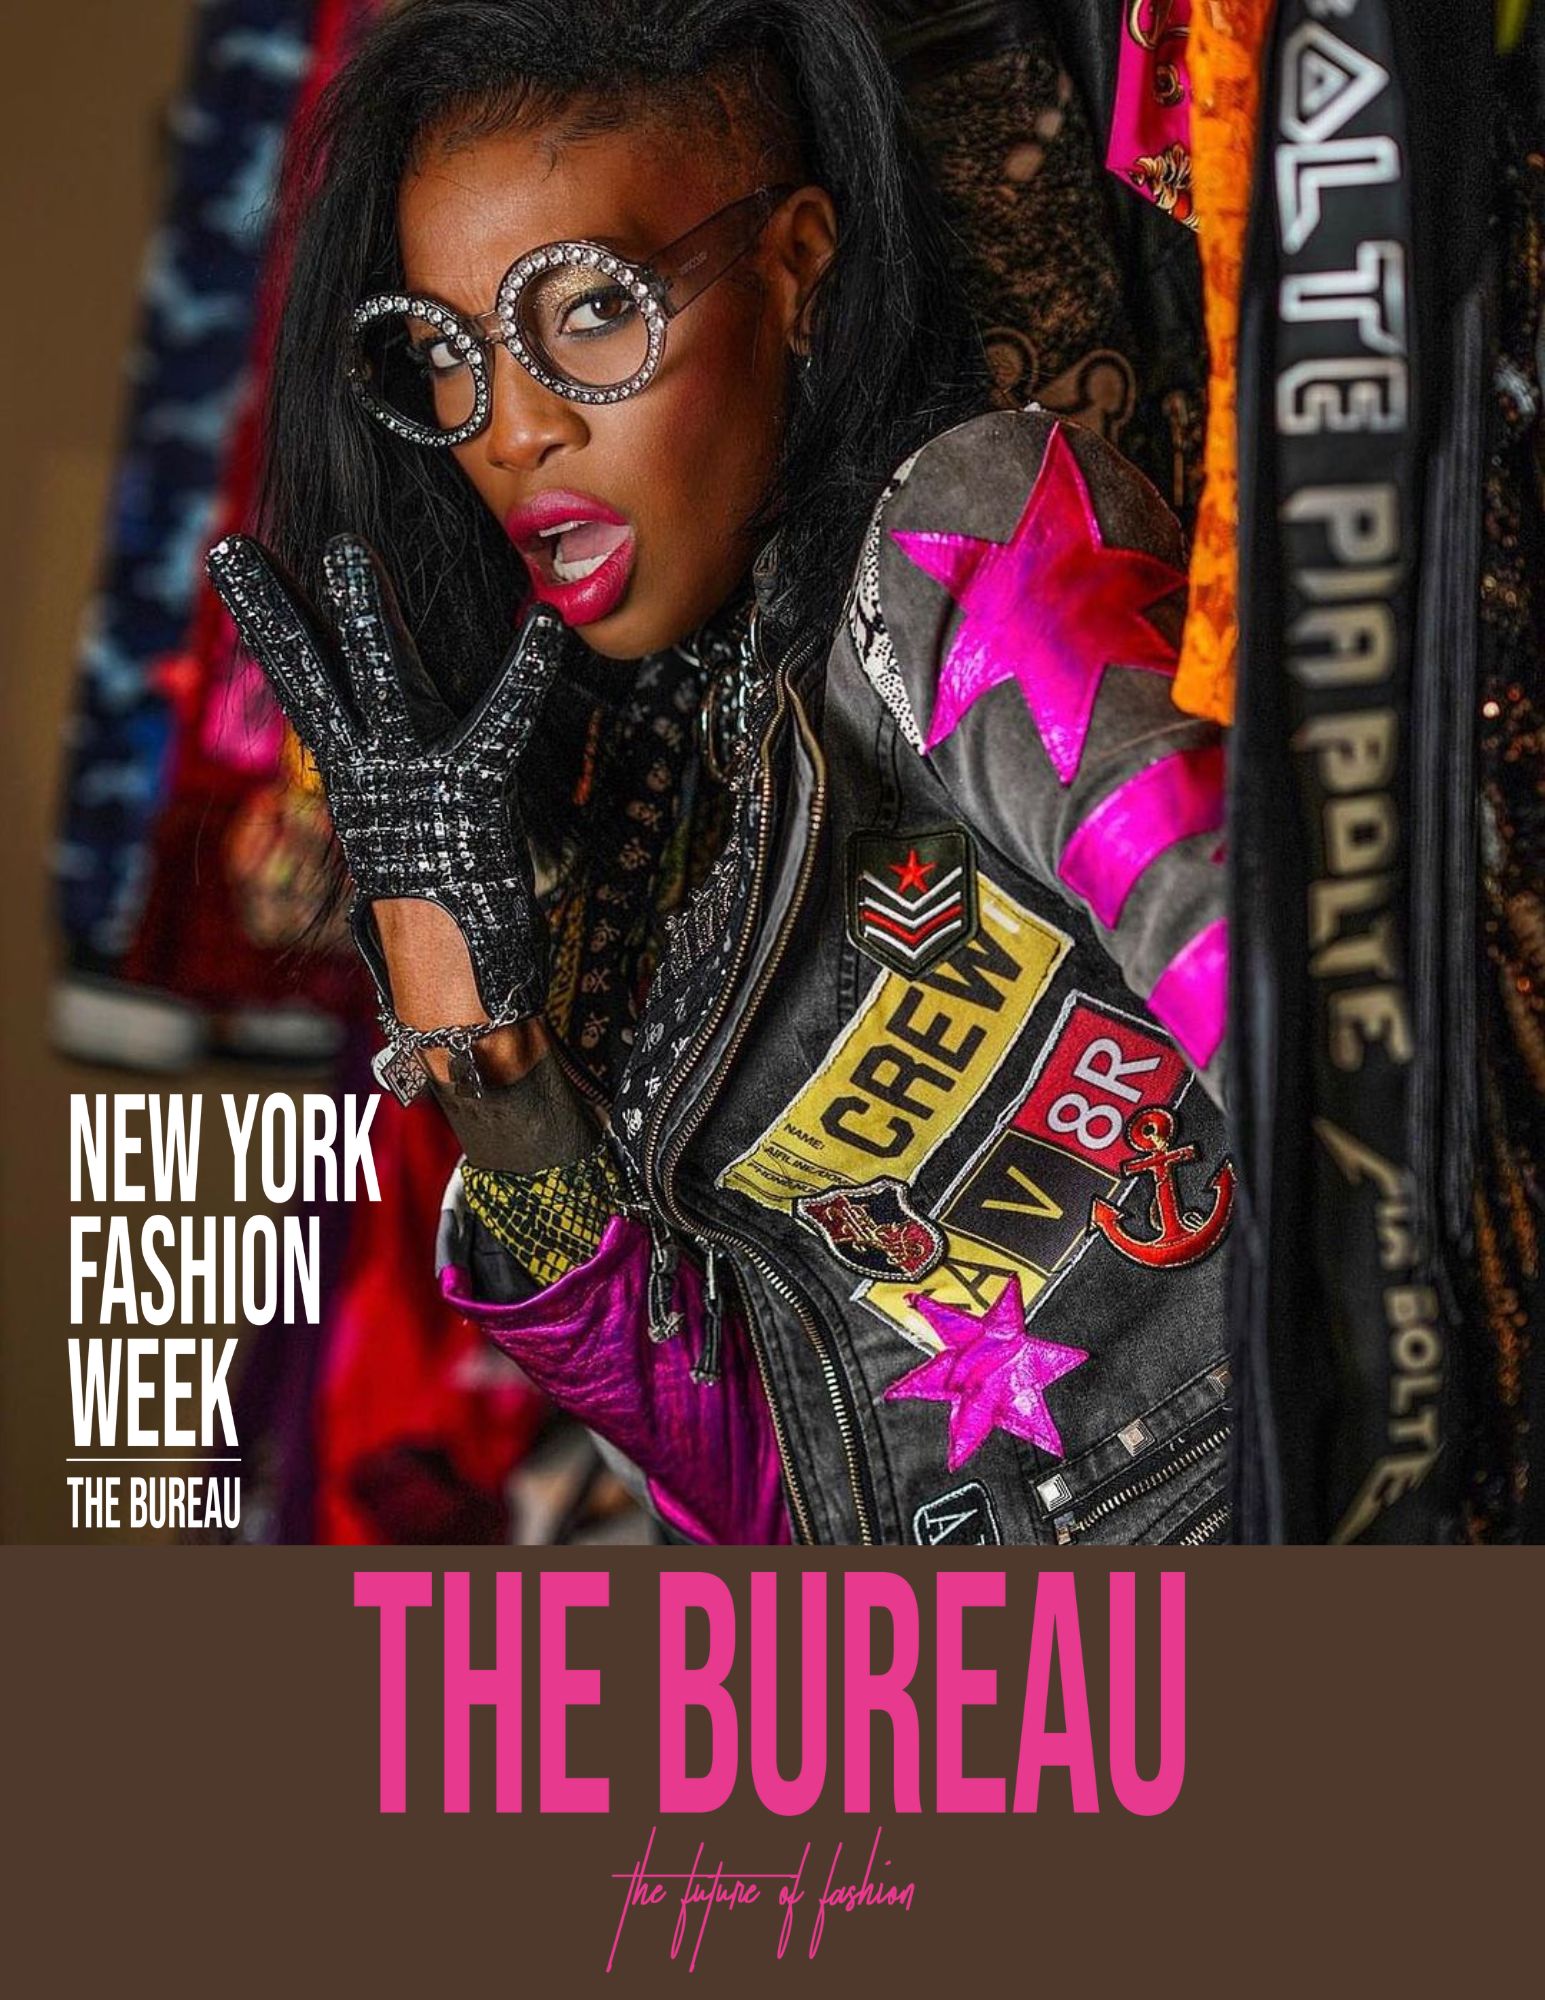 Owner of the Bureau Fashion Week Speaks Out on All the Craziness at His